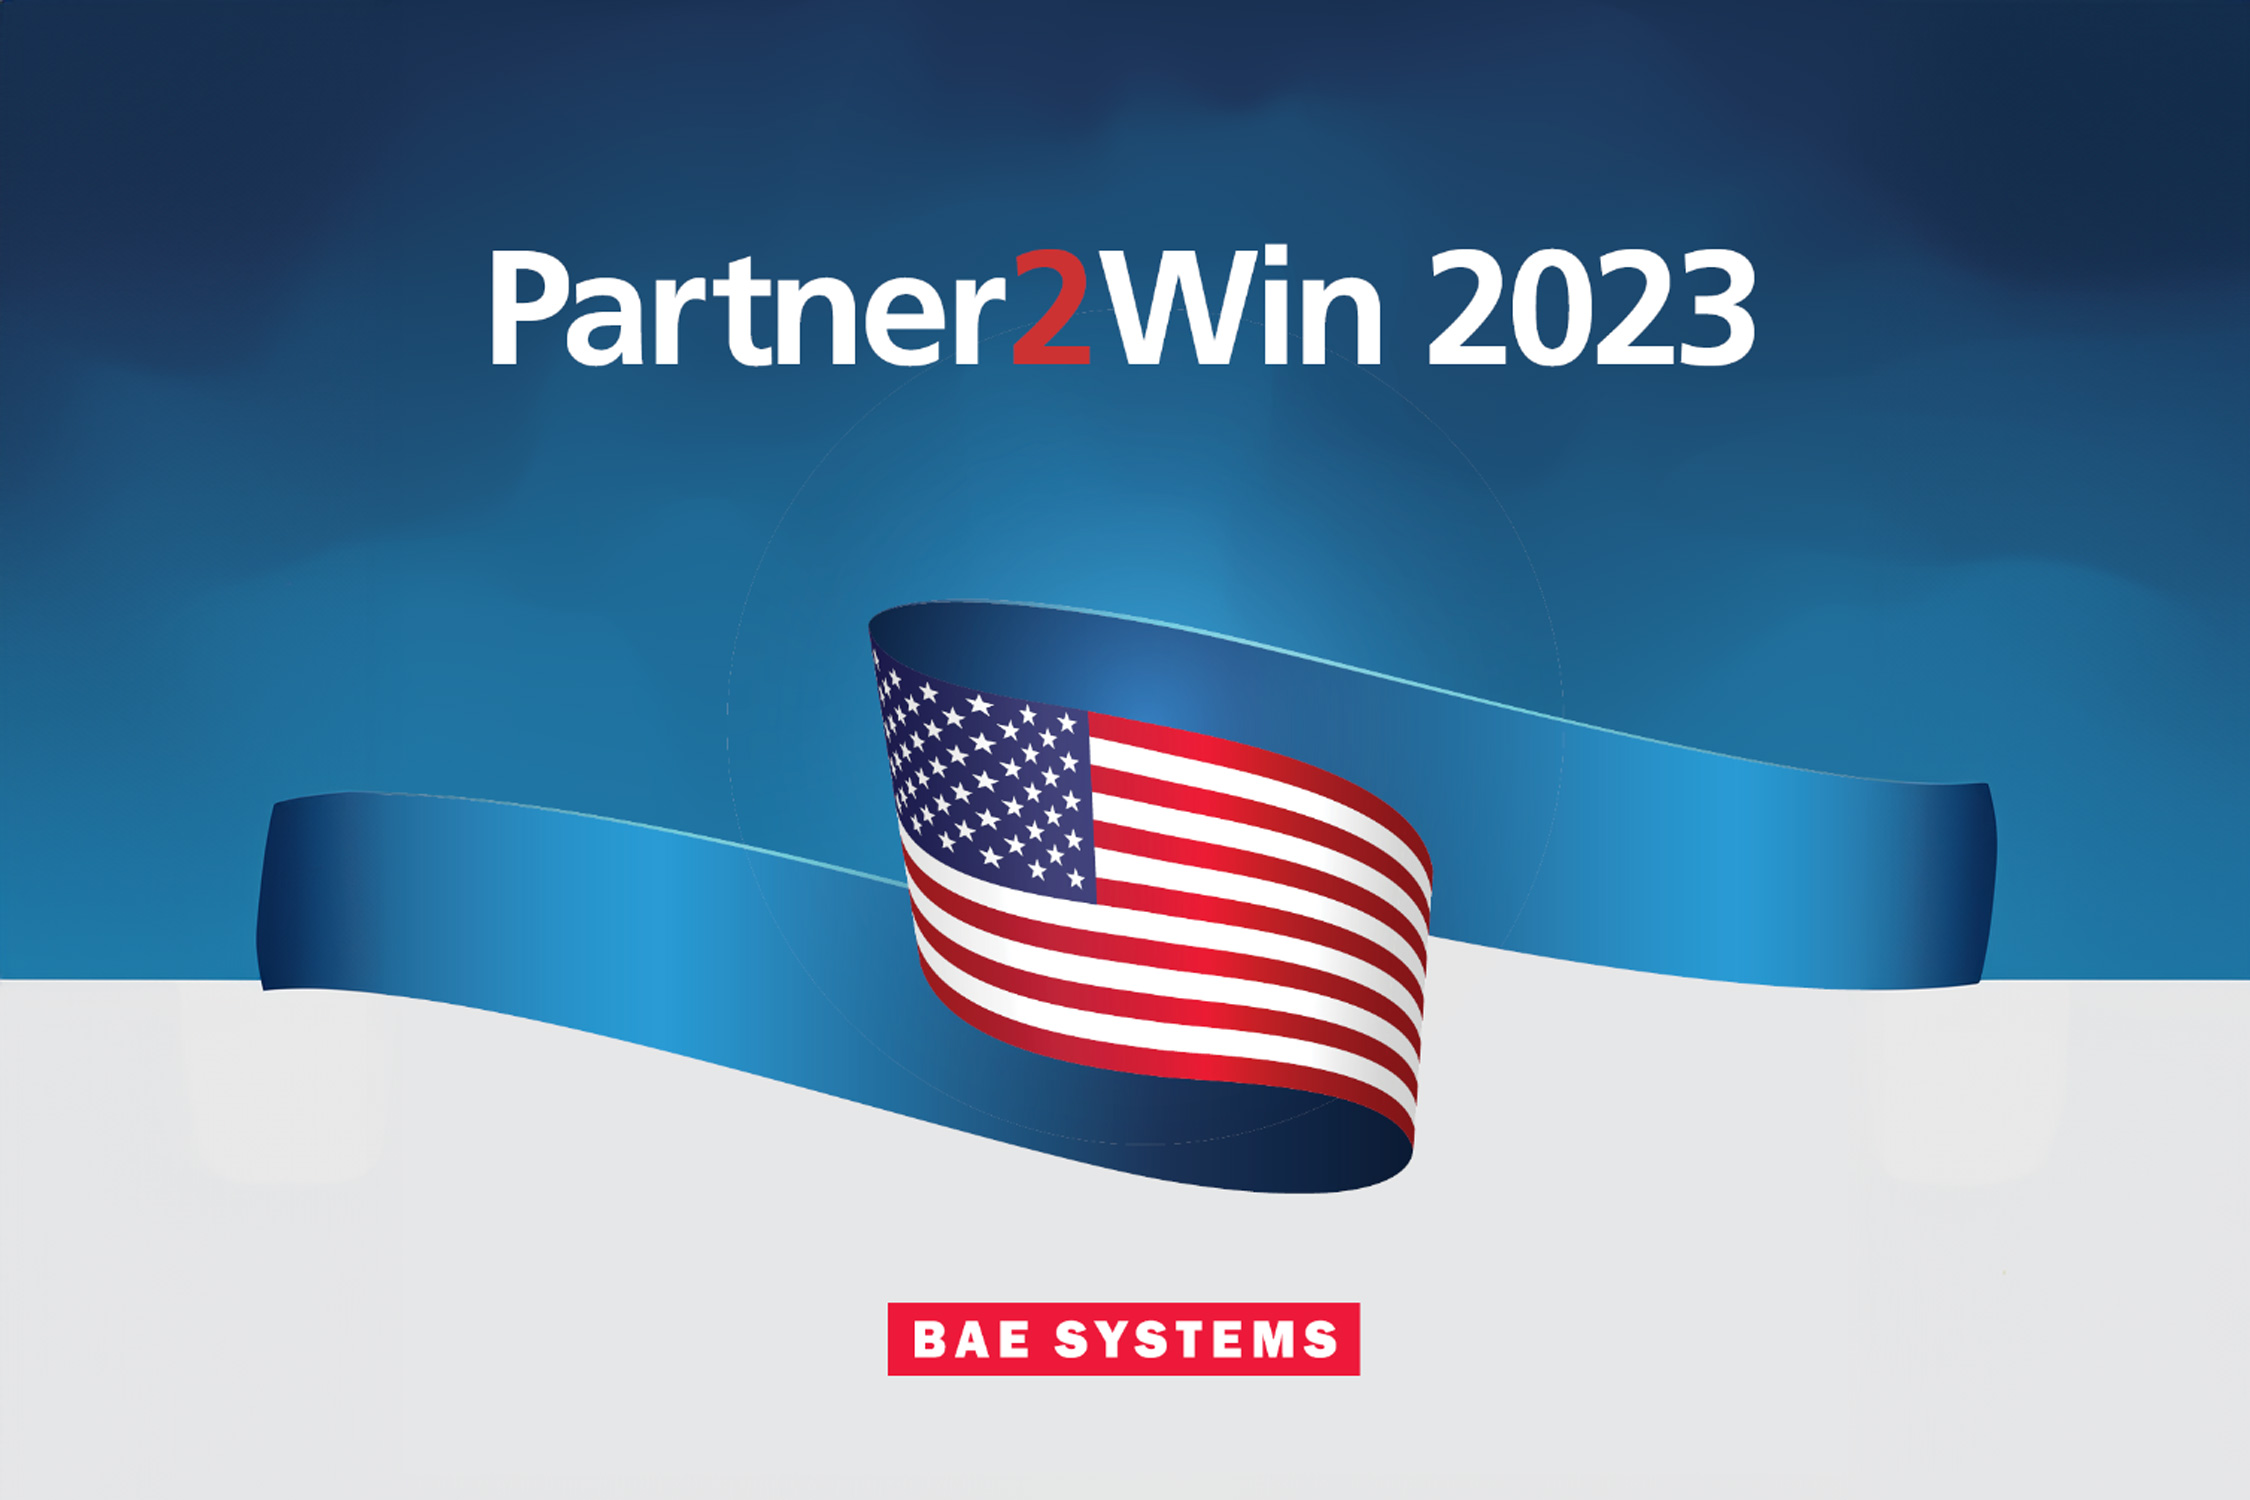 Featured image for “Futuramic named Most Improved Supplier of the Year and Bronze Medallion winner at BAE Sysytems’ 2023 Partner2Win Supplier Symposium”